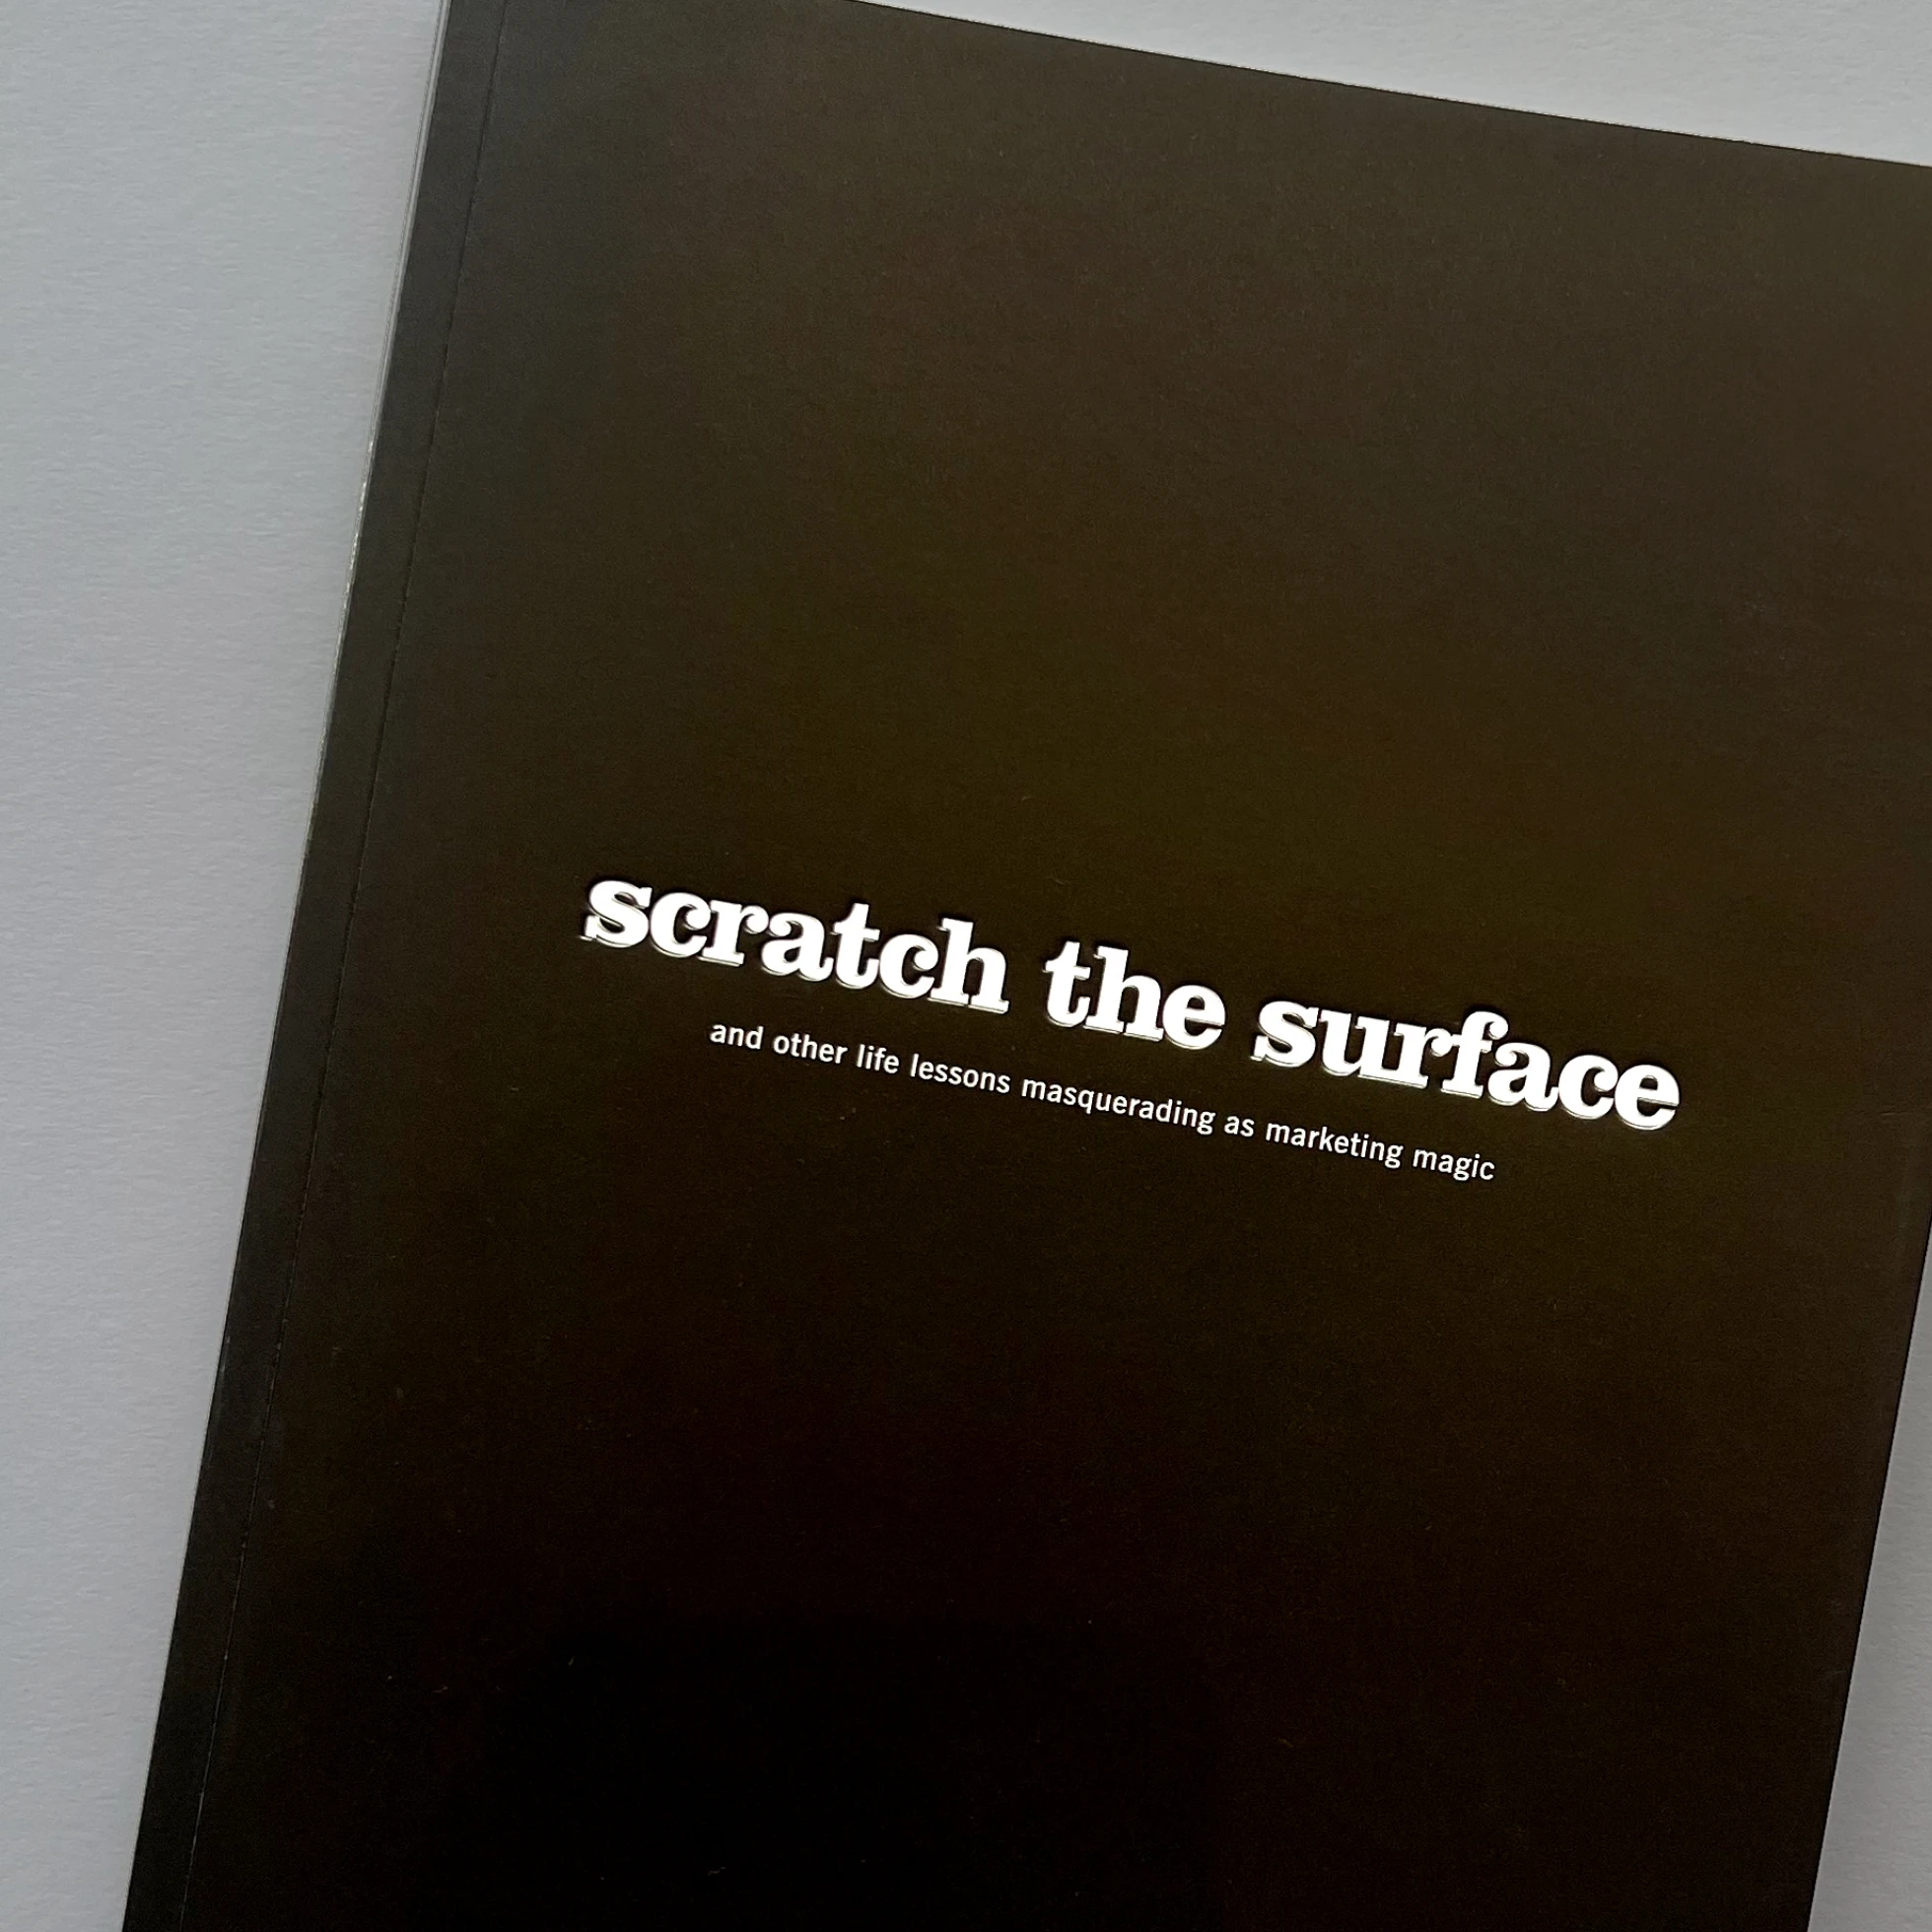 Scratch the surface book cover.